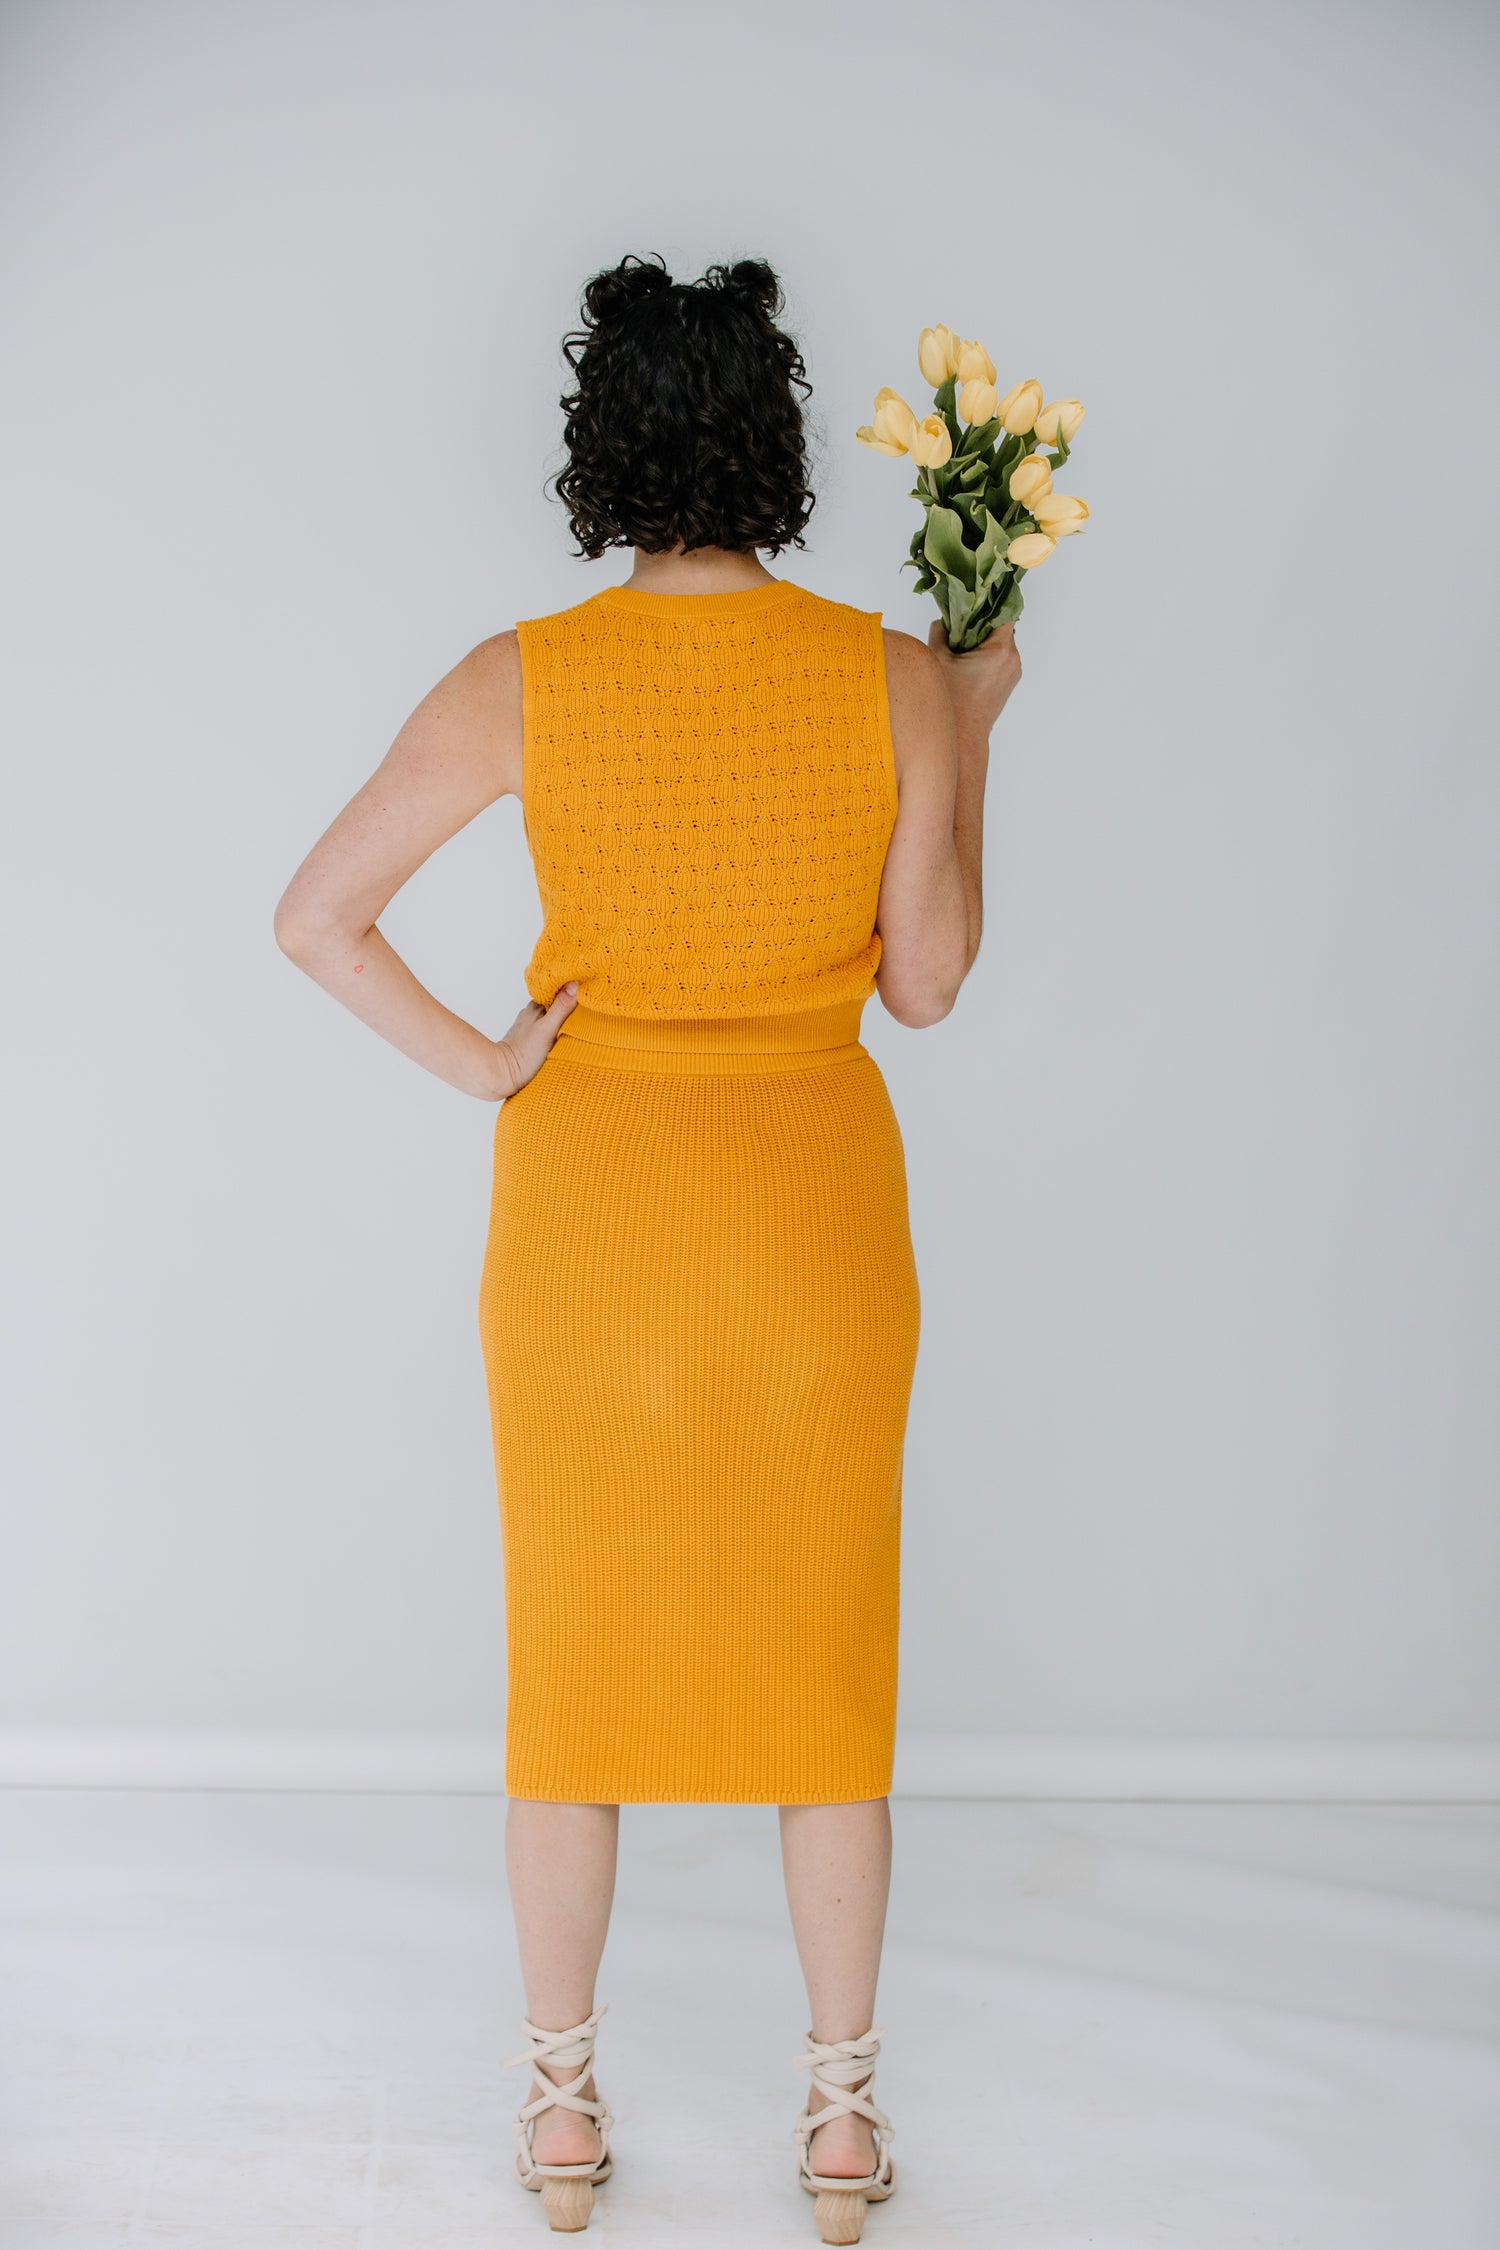 lacey wears the pointelle top and ribbed midi skirt in marigold by mr mittens. she is holding yellow tulips and has aloha creative ivory heels on.